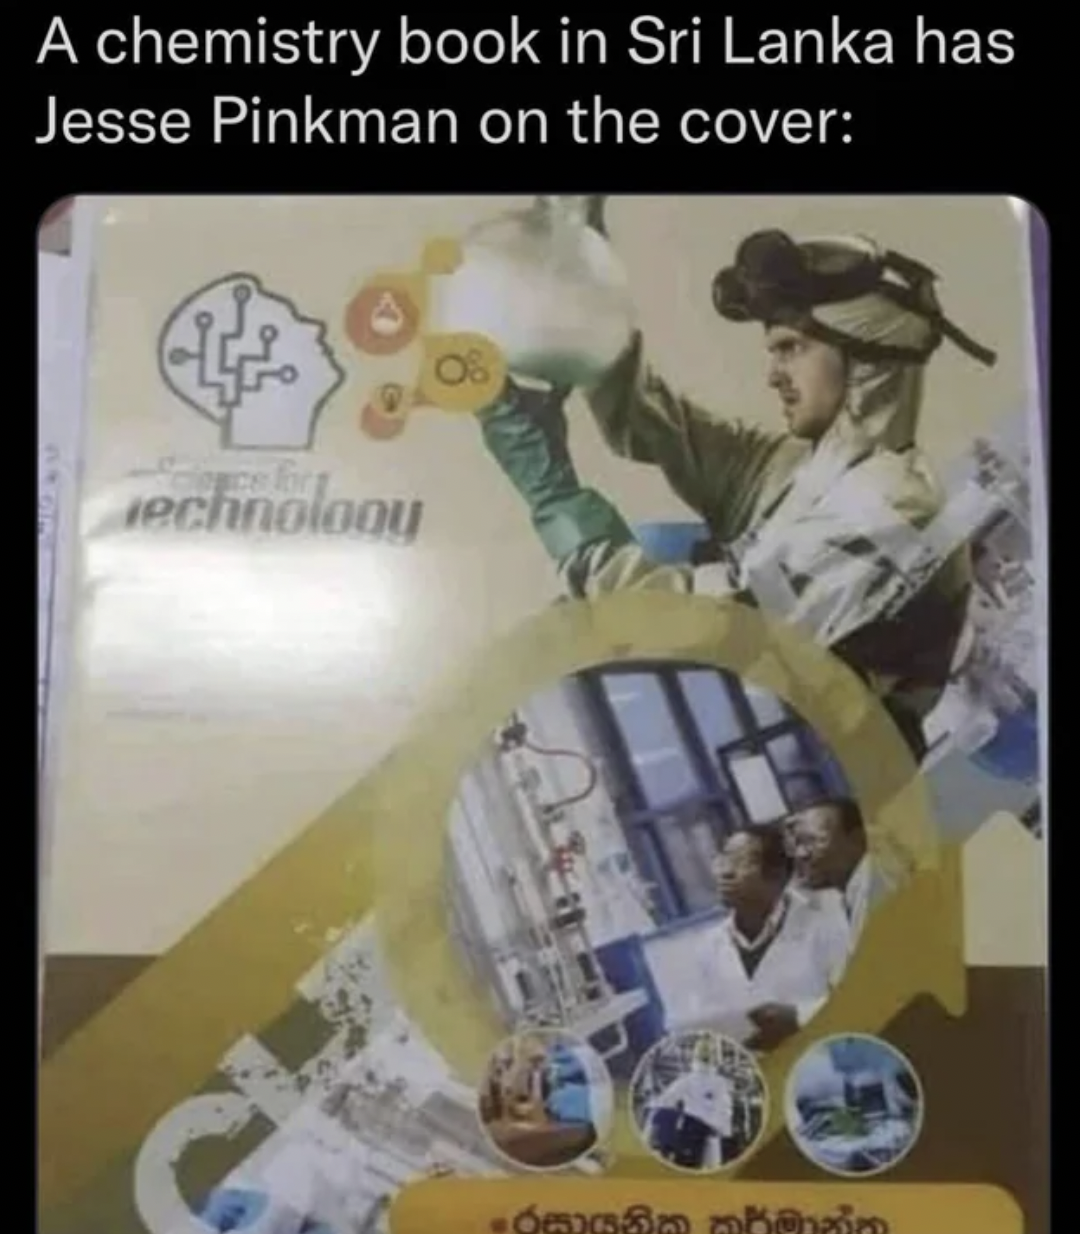 A chemistry book in Sri Lanka has Jesse Pinkman on the cover echnolooy